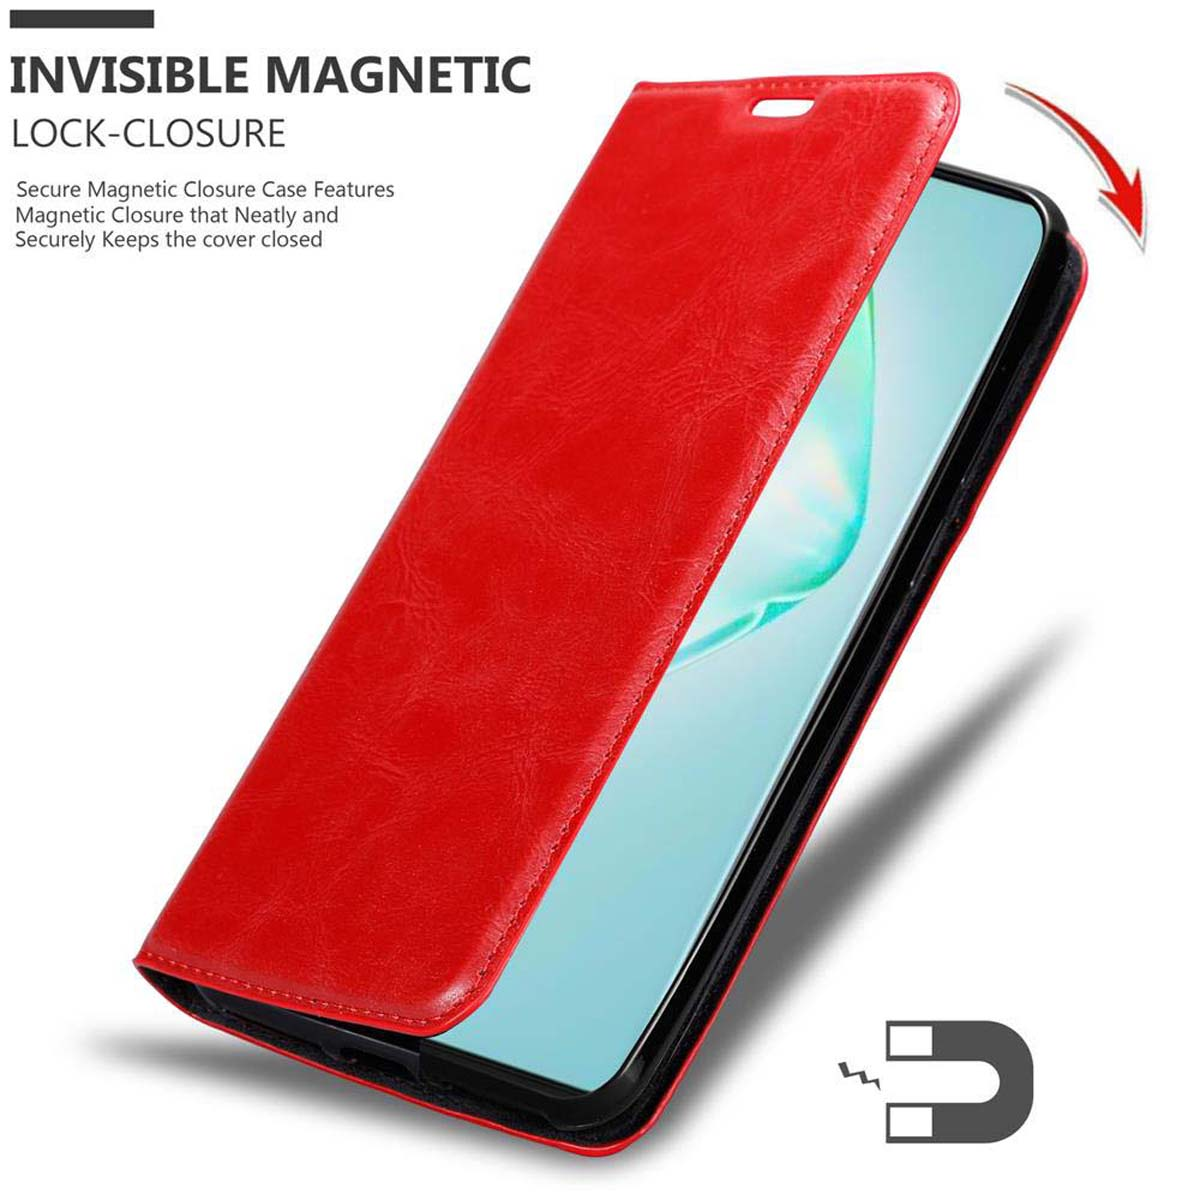 Hülle Magnet, Invisible / LITE Bookcover, CADORABO A91 / APFEL M80s, Samsung, S10 Galaxy Book ROT